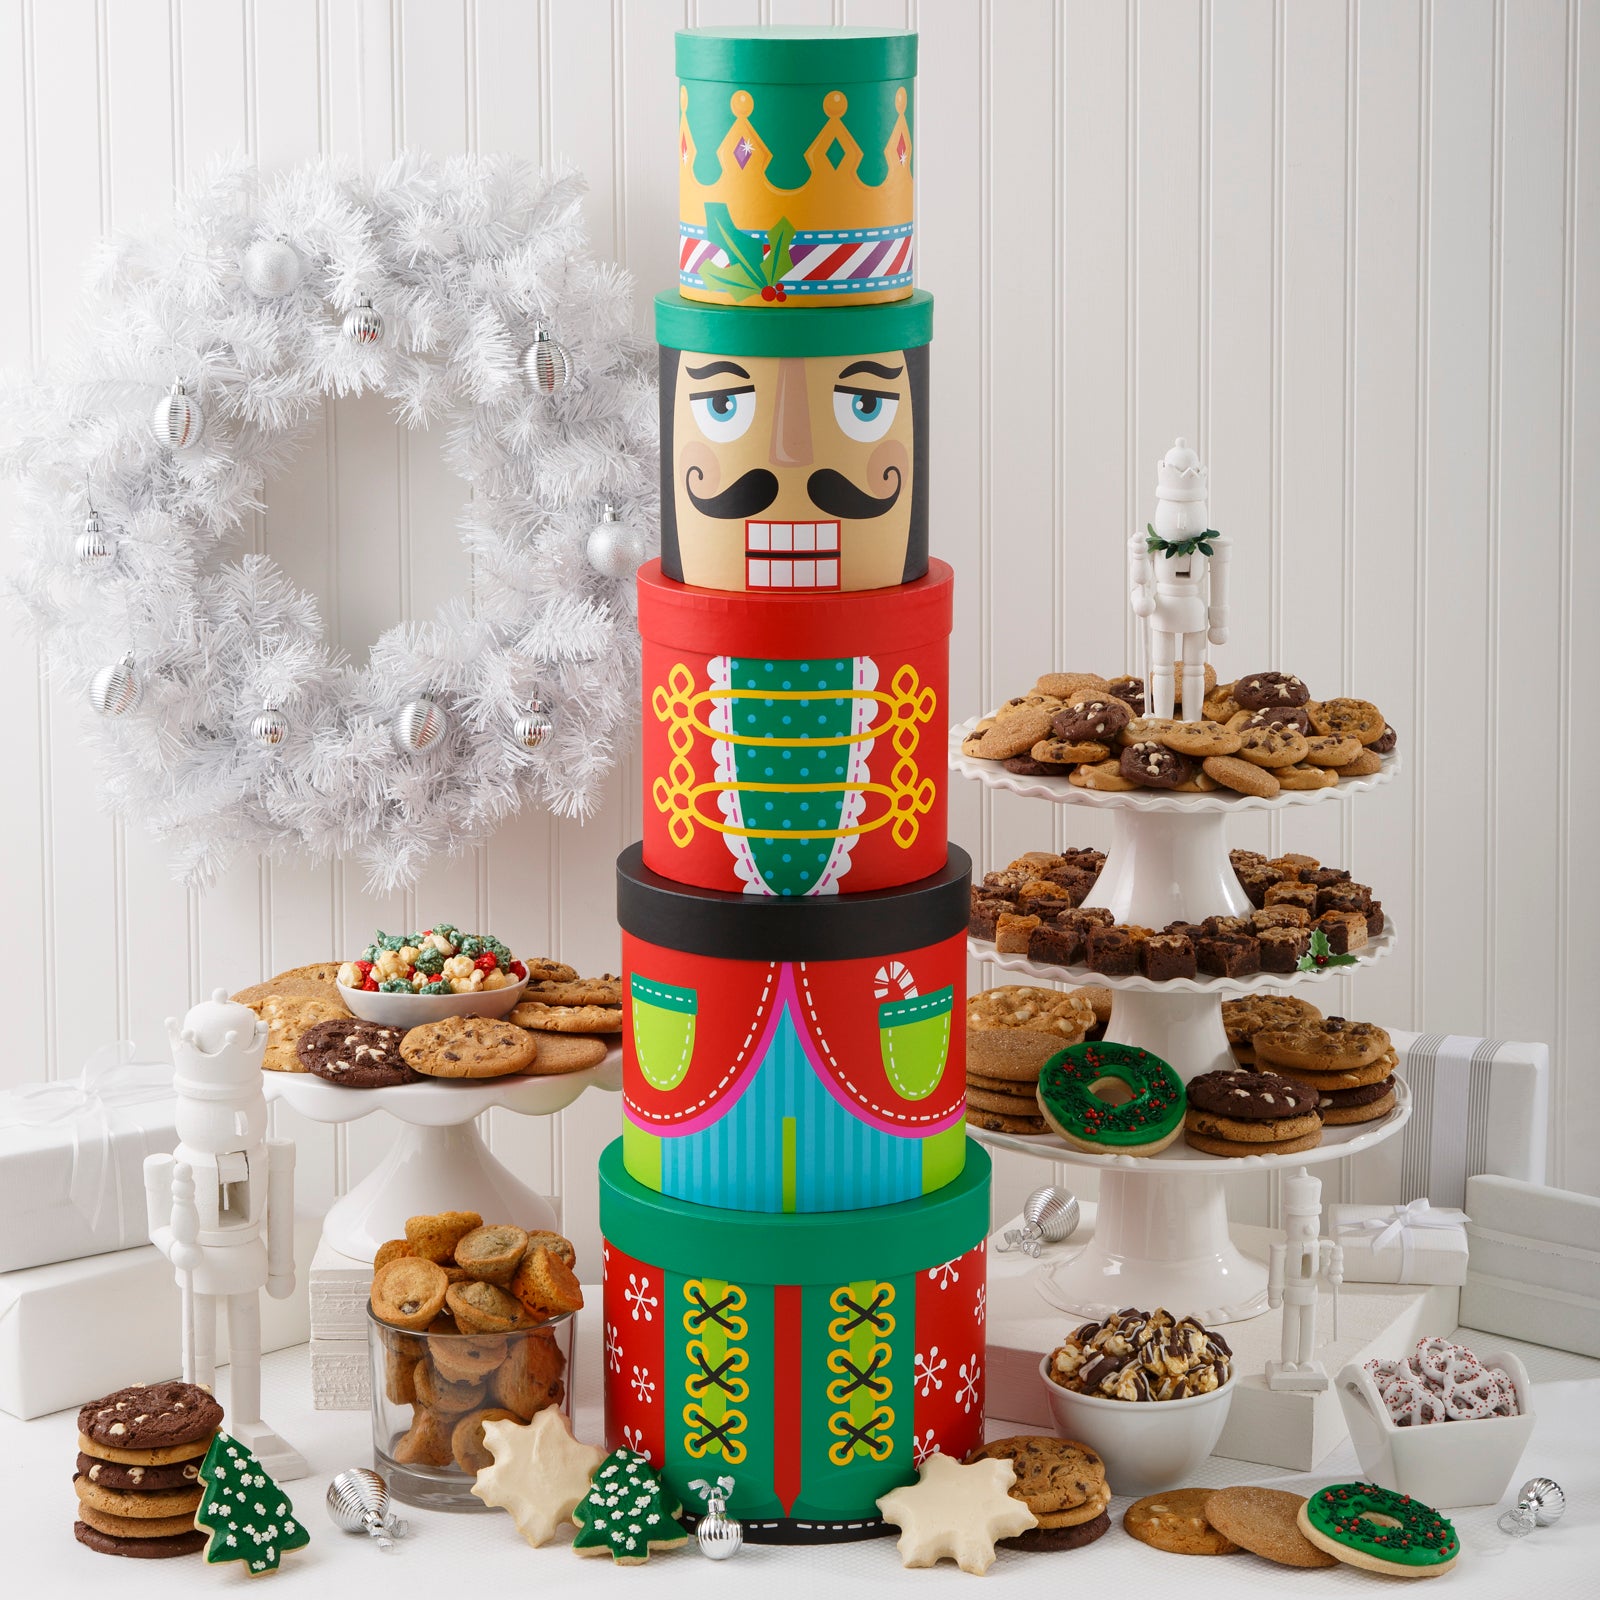 A five-tier nutcracker tower surrounded by an assortment of Nibblers®, original cookies, muffins, holiday popcorn, chocolate drizzled popcorn, yogurt-covered pretzels, two frosted wreath cookies with sprinkles, two snowflake cookies, and two frosted holiday trees with sprinkles.